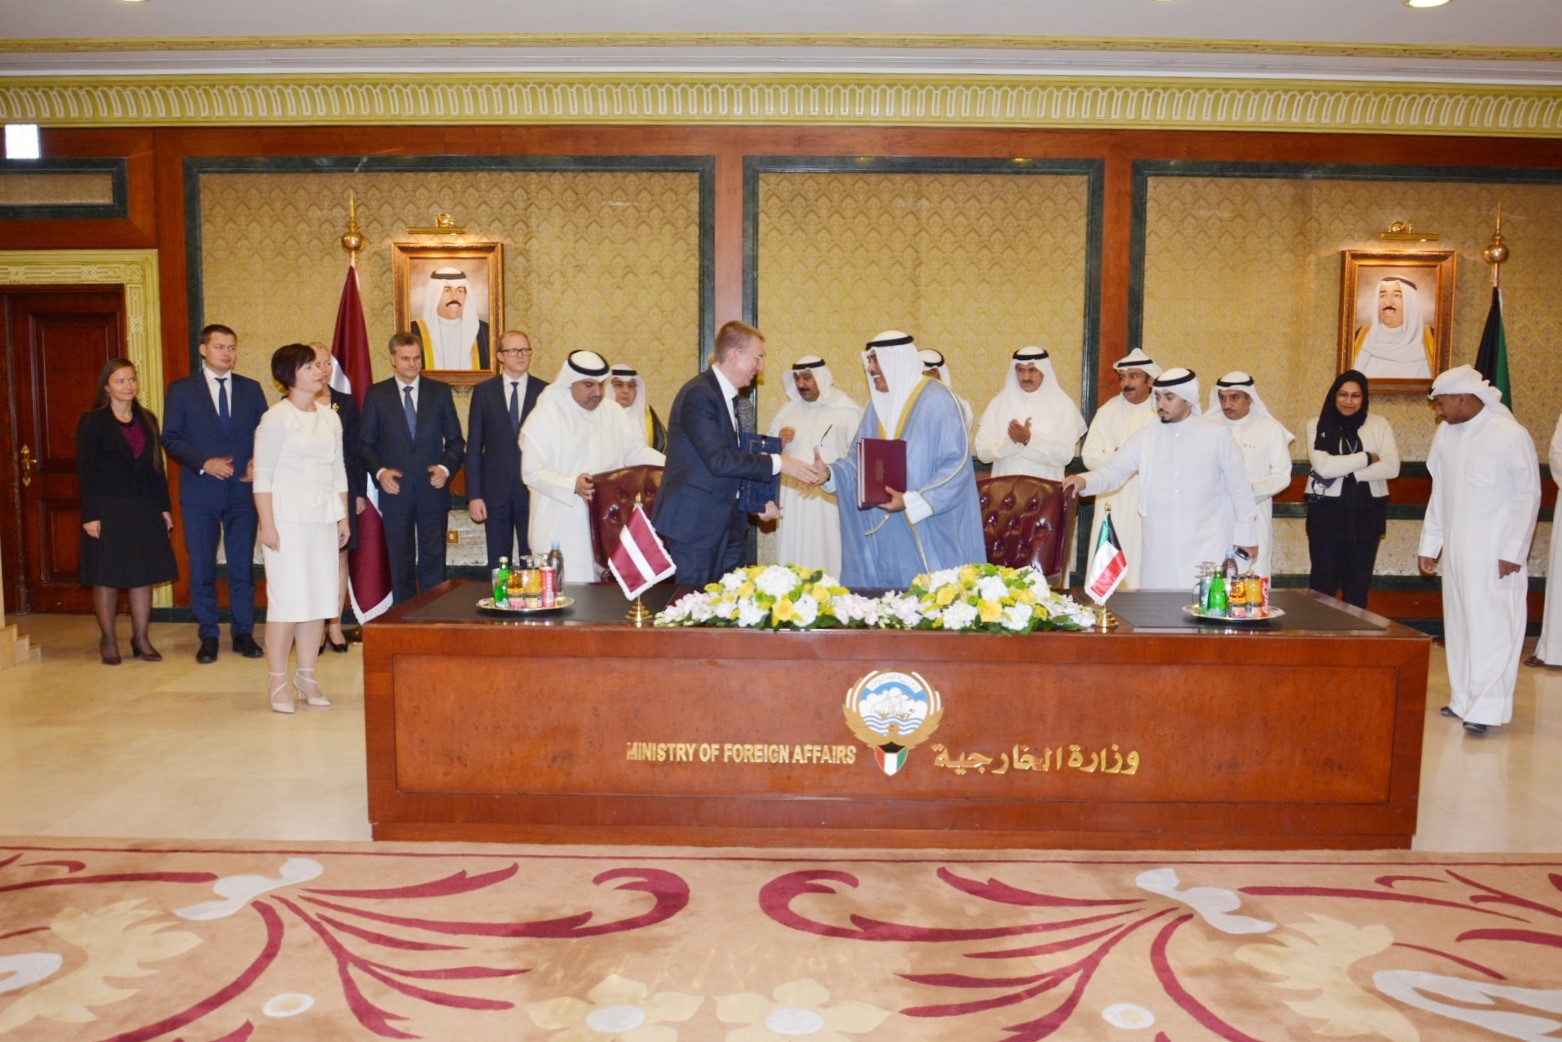 kuwait and Latvia sign accords to bolster ties	